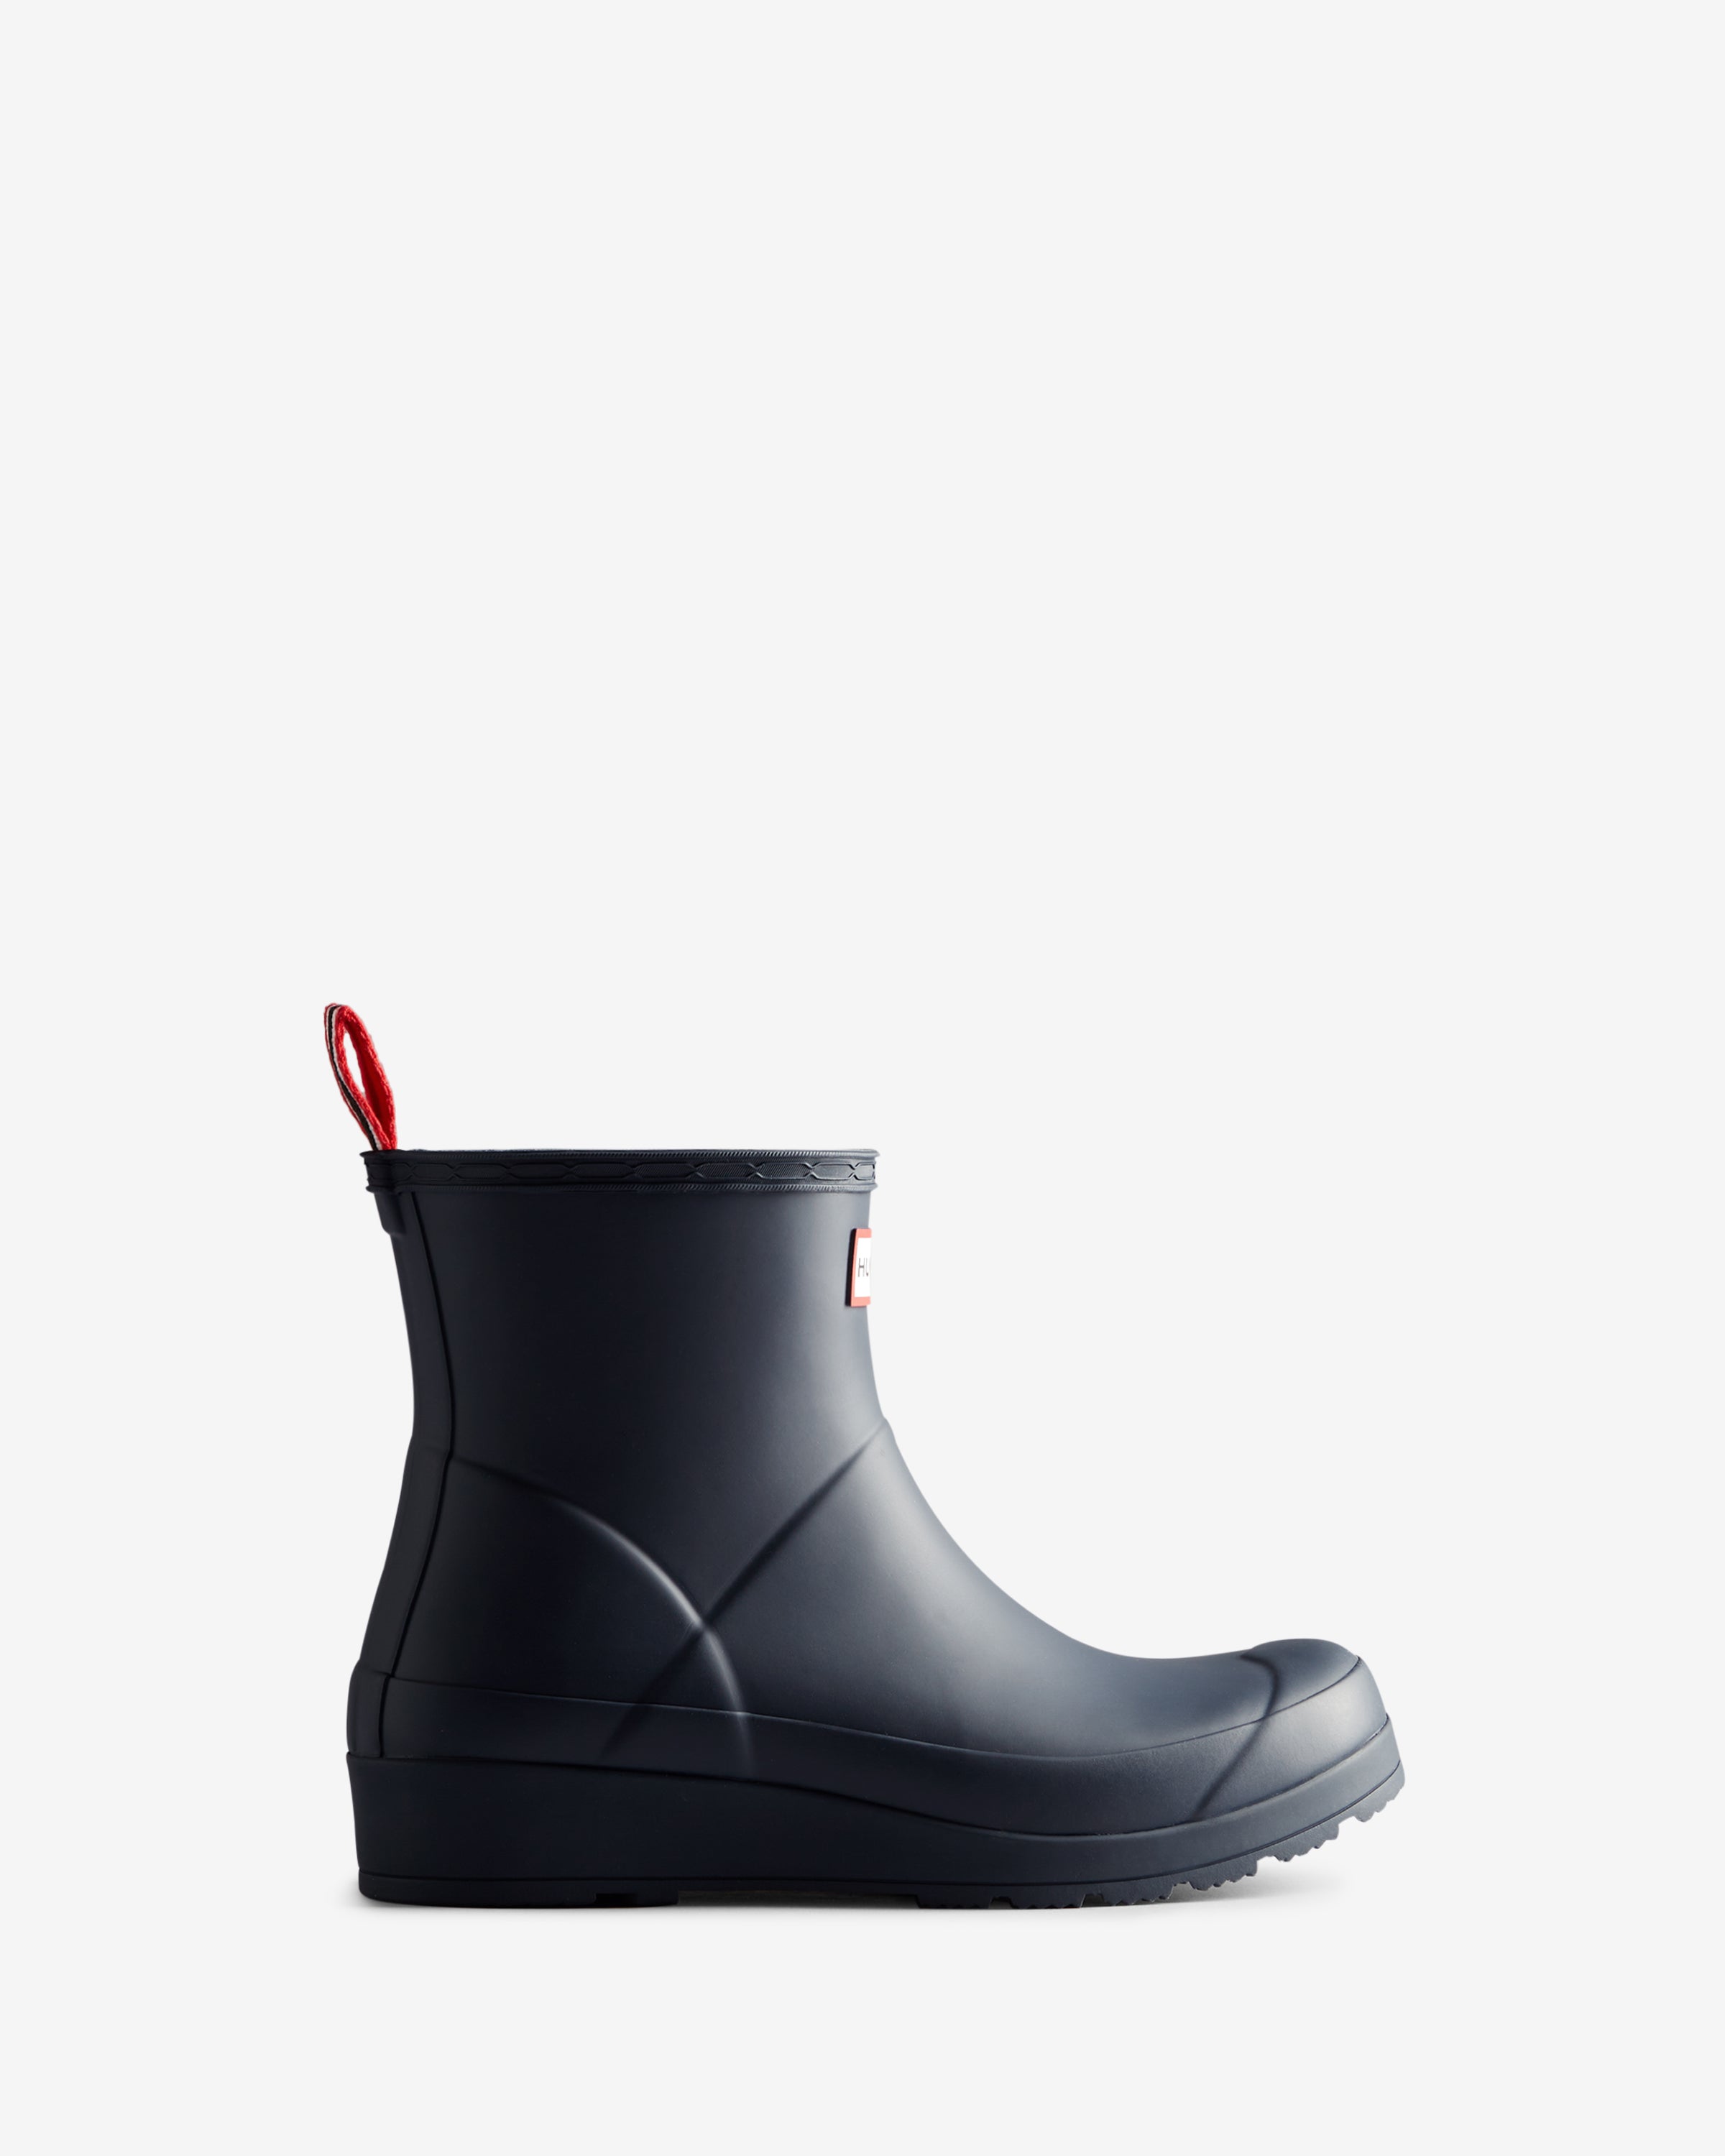 Play Boot – Hunter Boots UK